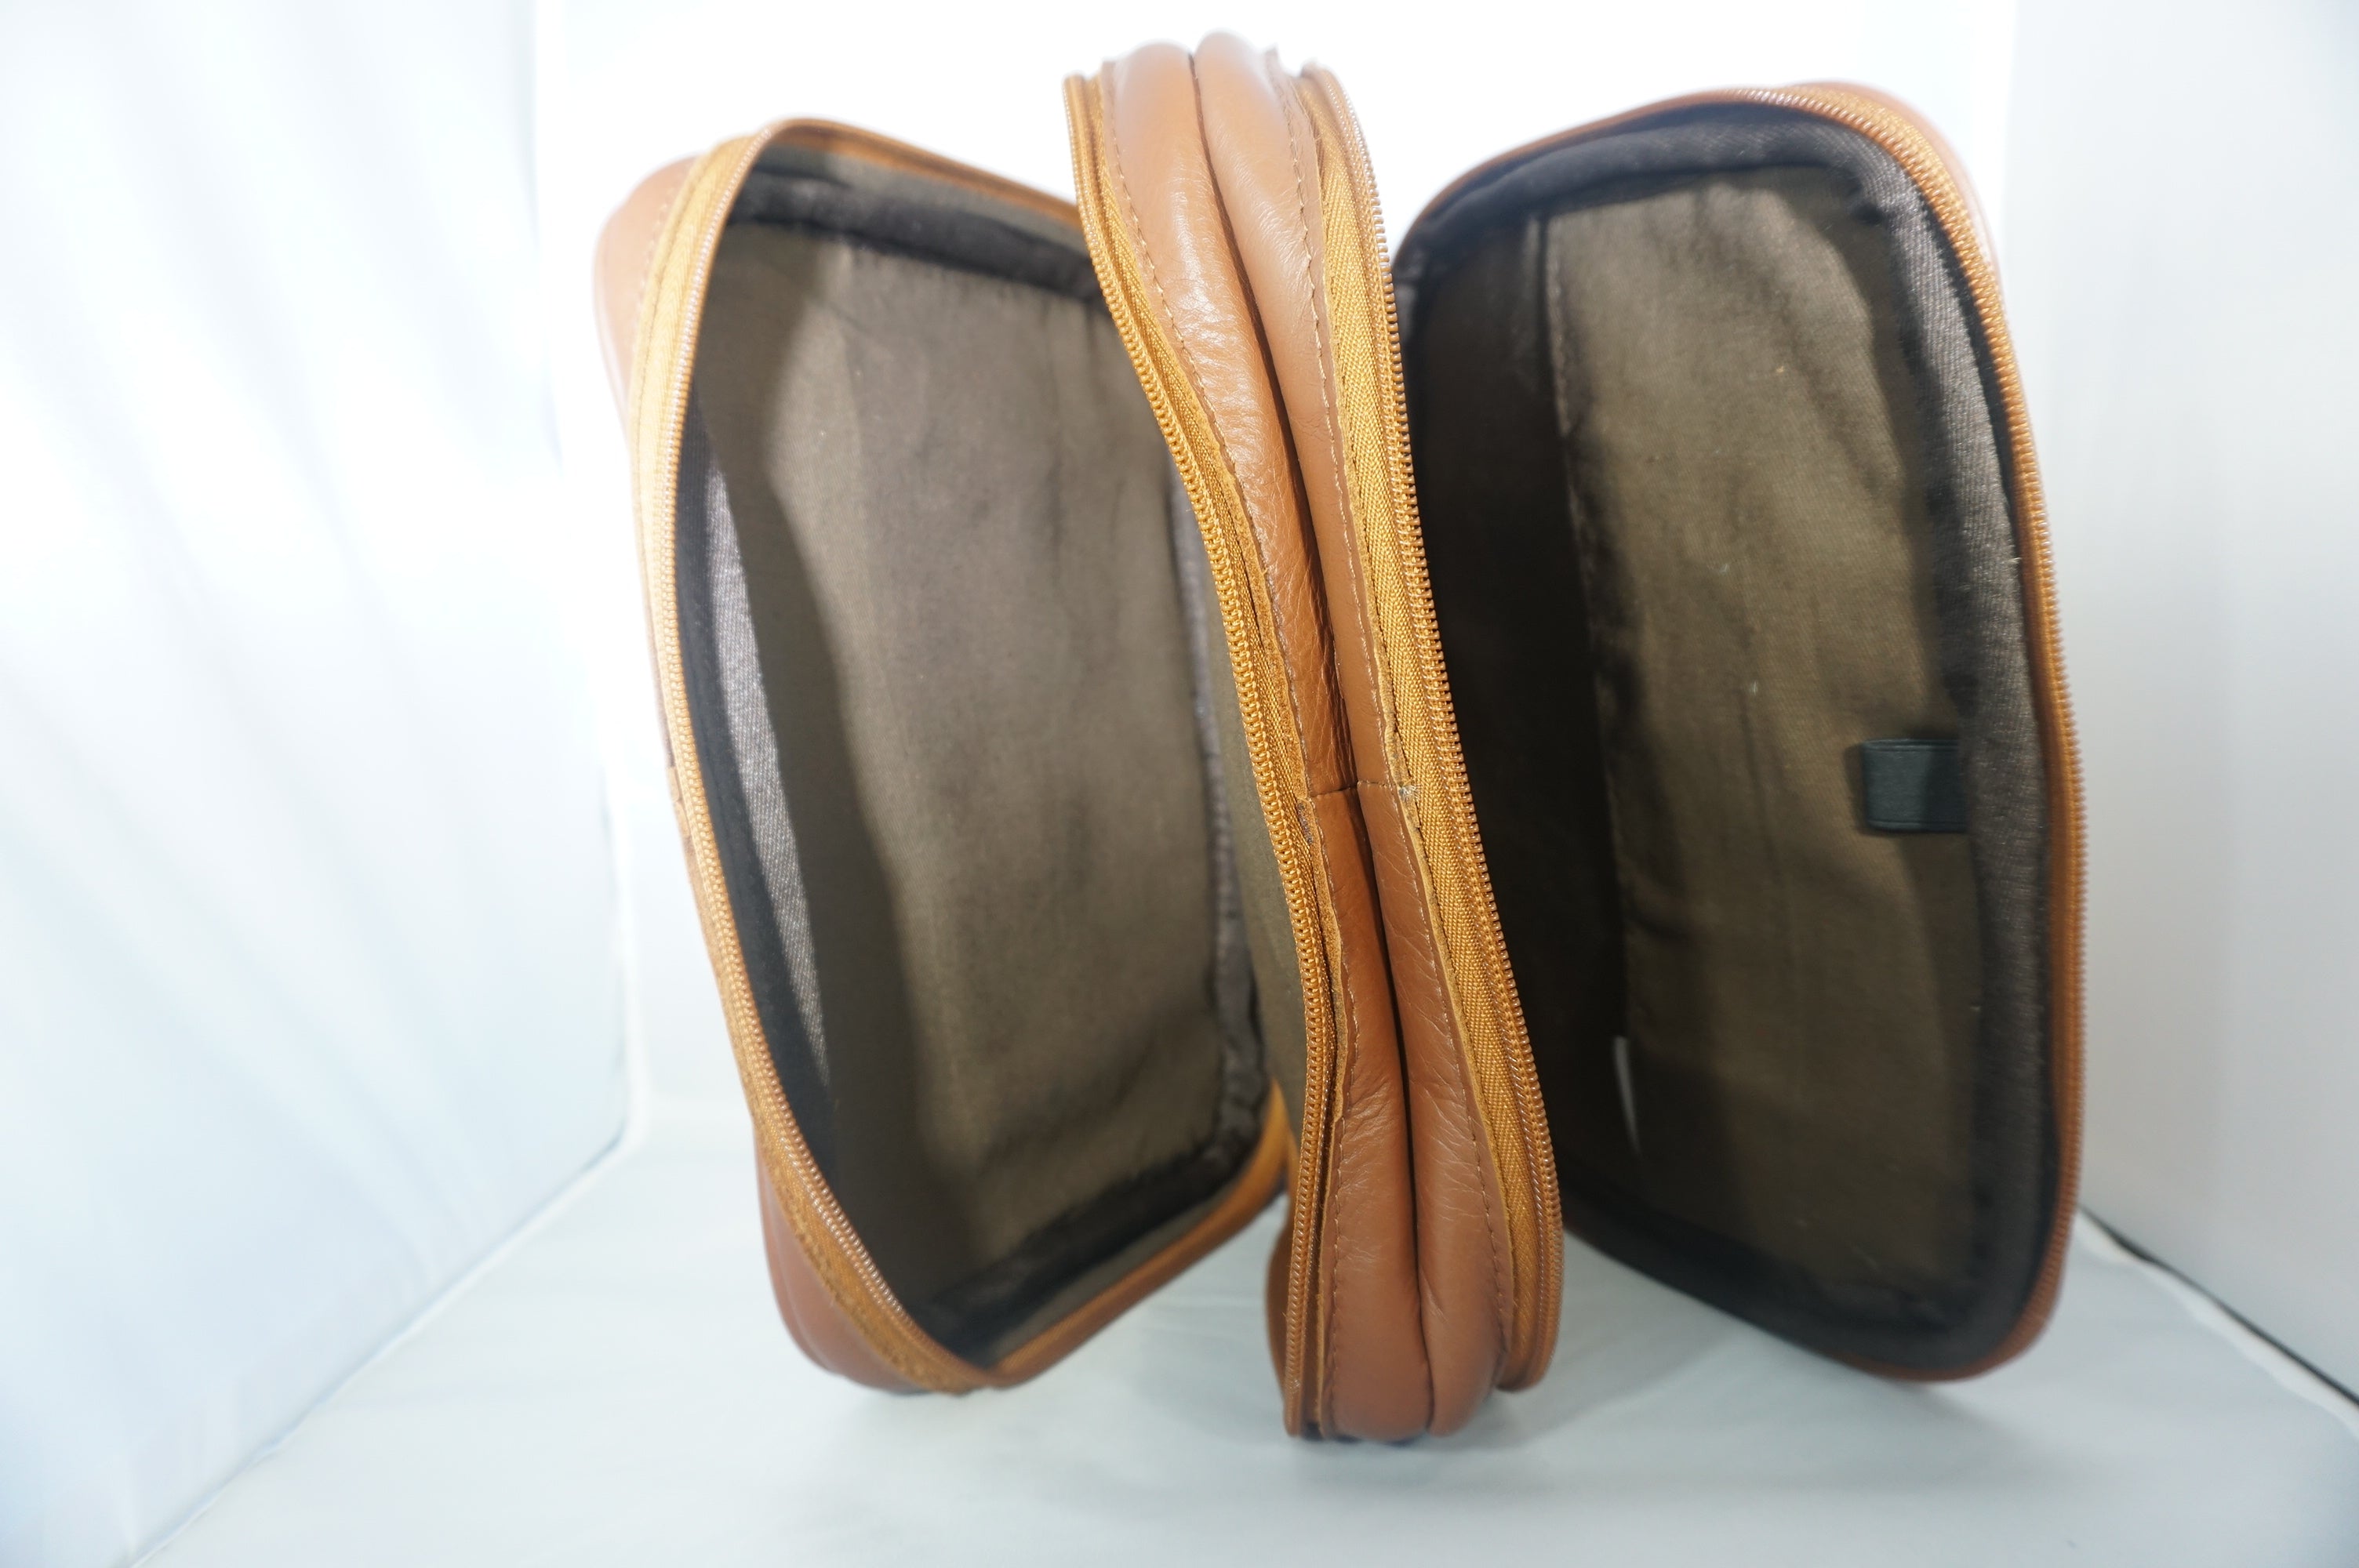 Handmade Leather Bible Cases with Cross | The Skipping Stone